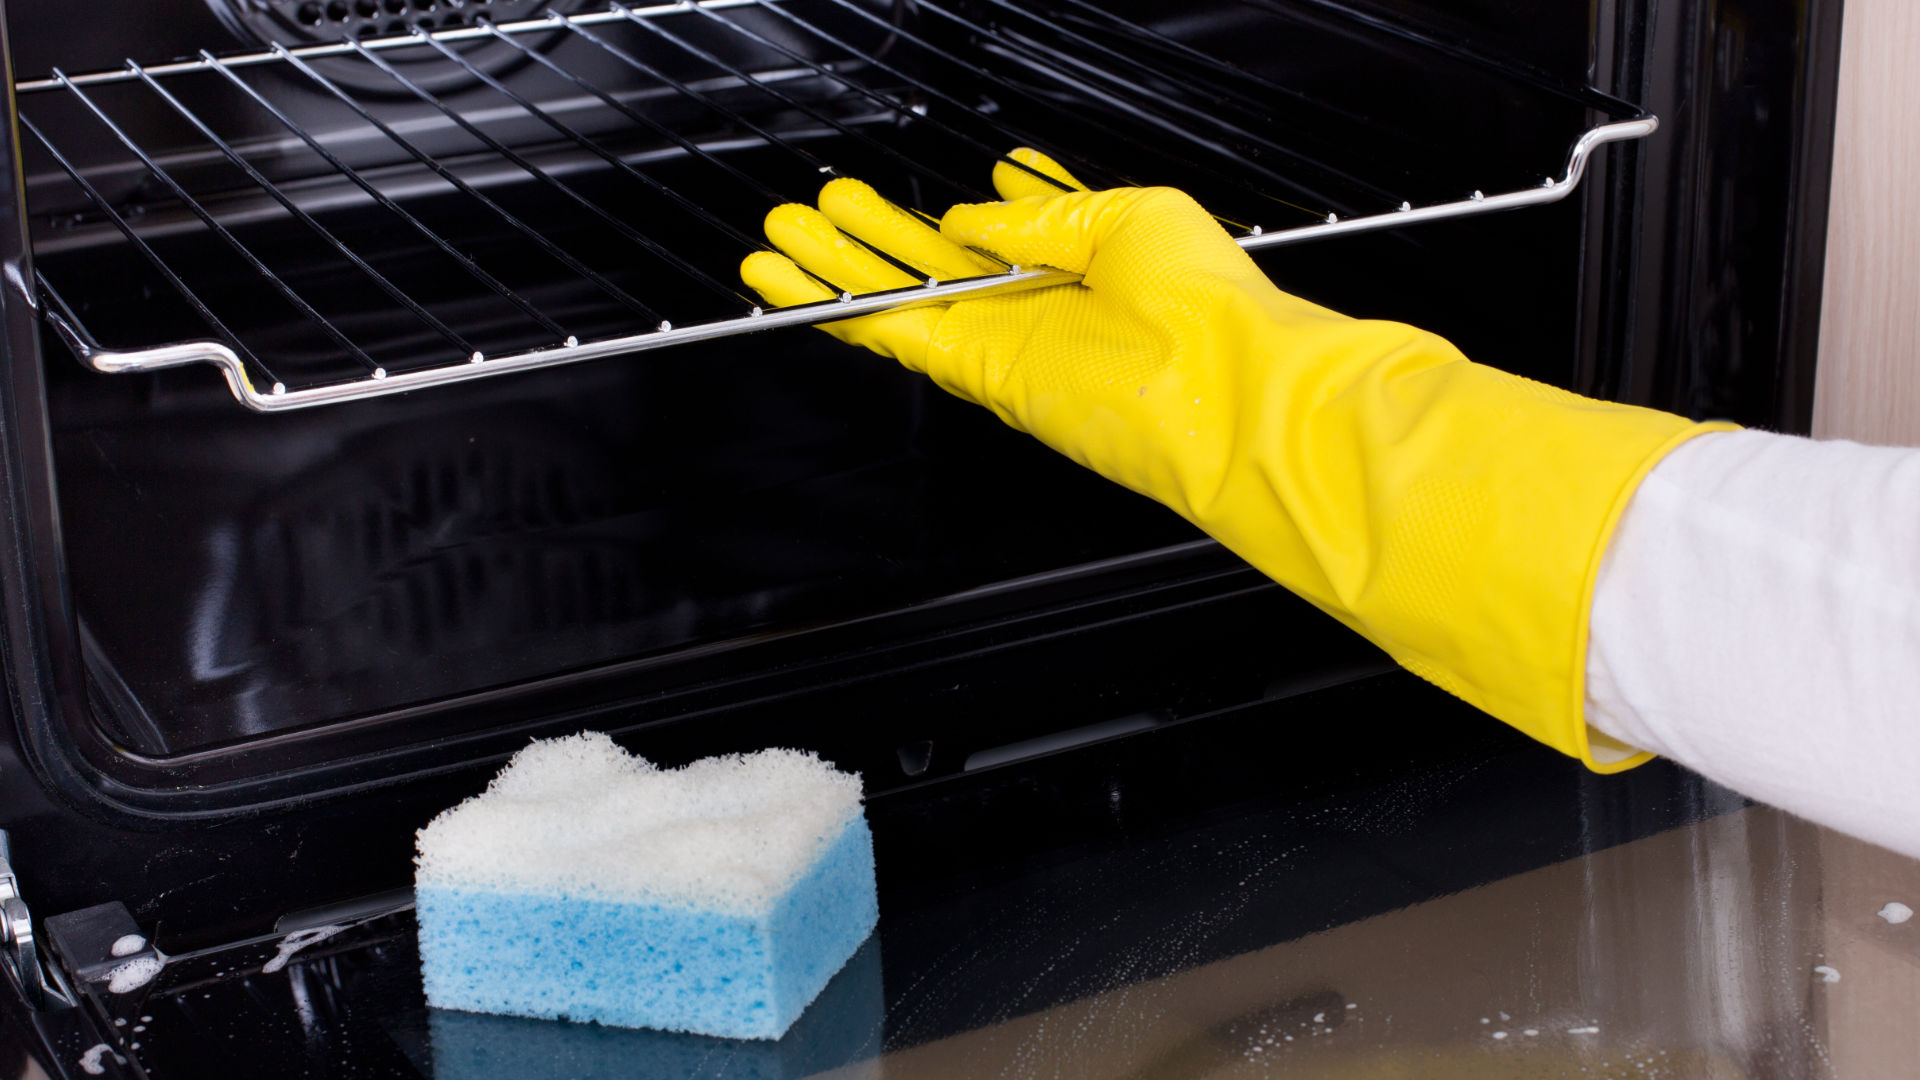 Can Self Cleaning Oven Kill You: Demystifying the Oven Safety Saga